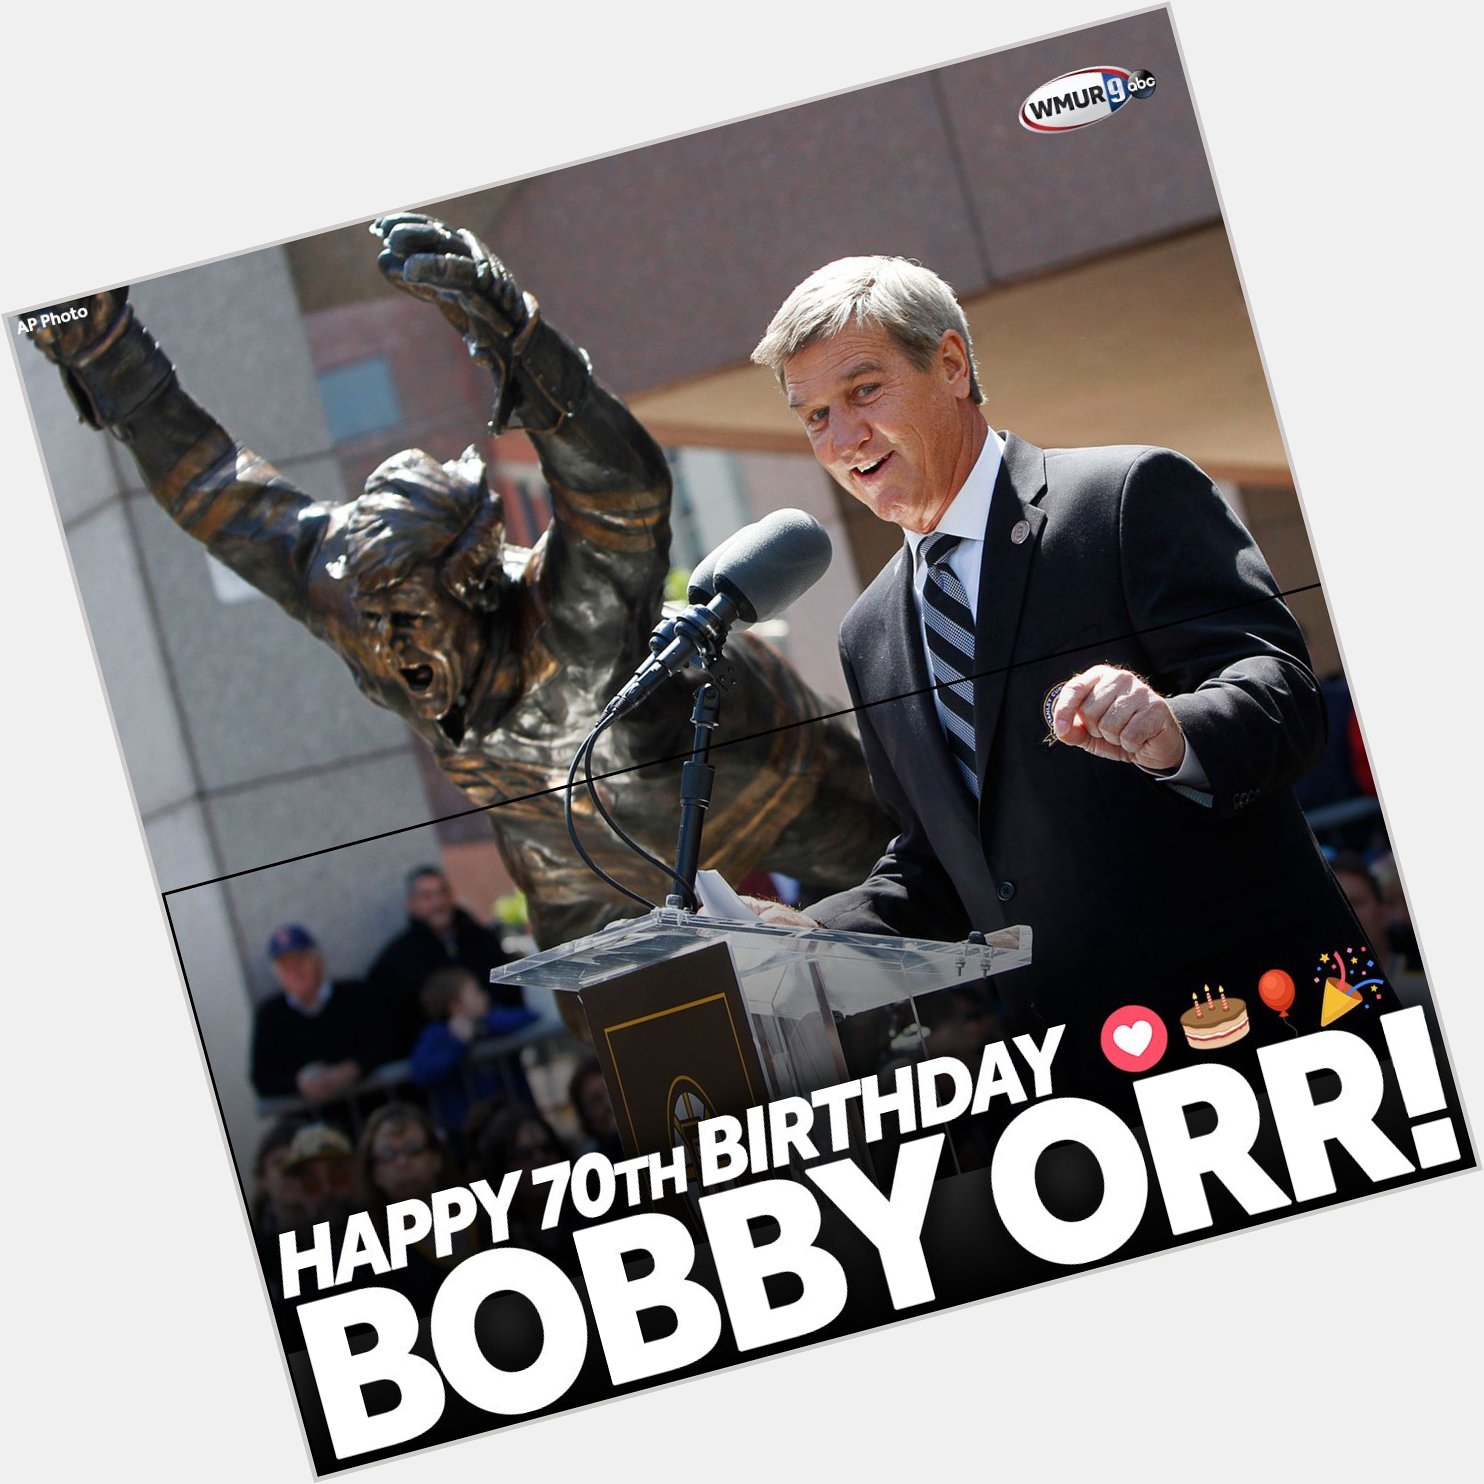  Happy 70th Birthday to this legend: No. 4, Bobby Orr! 